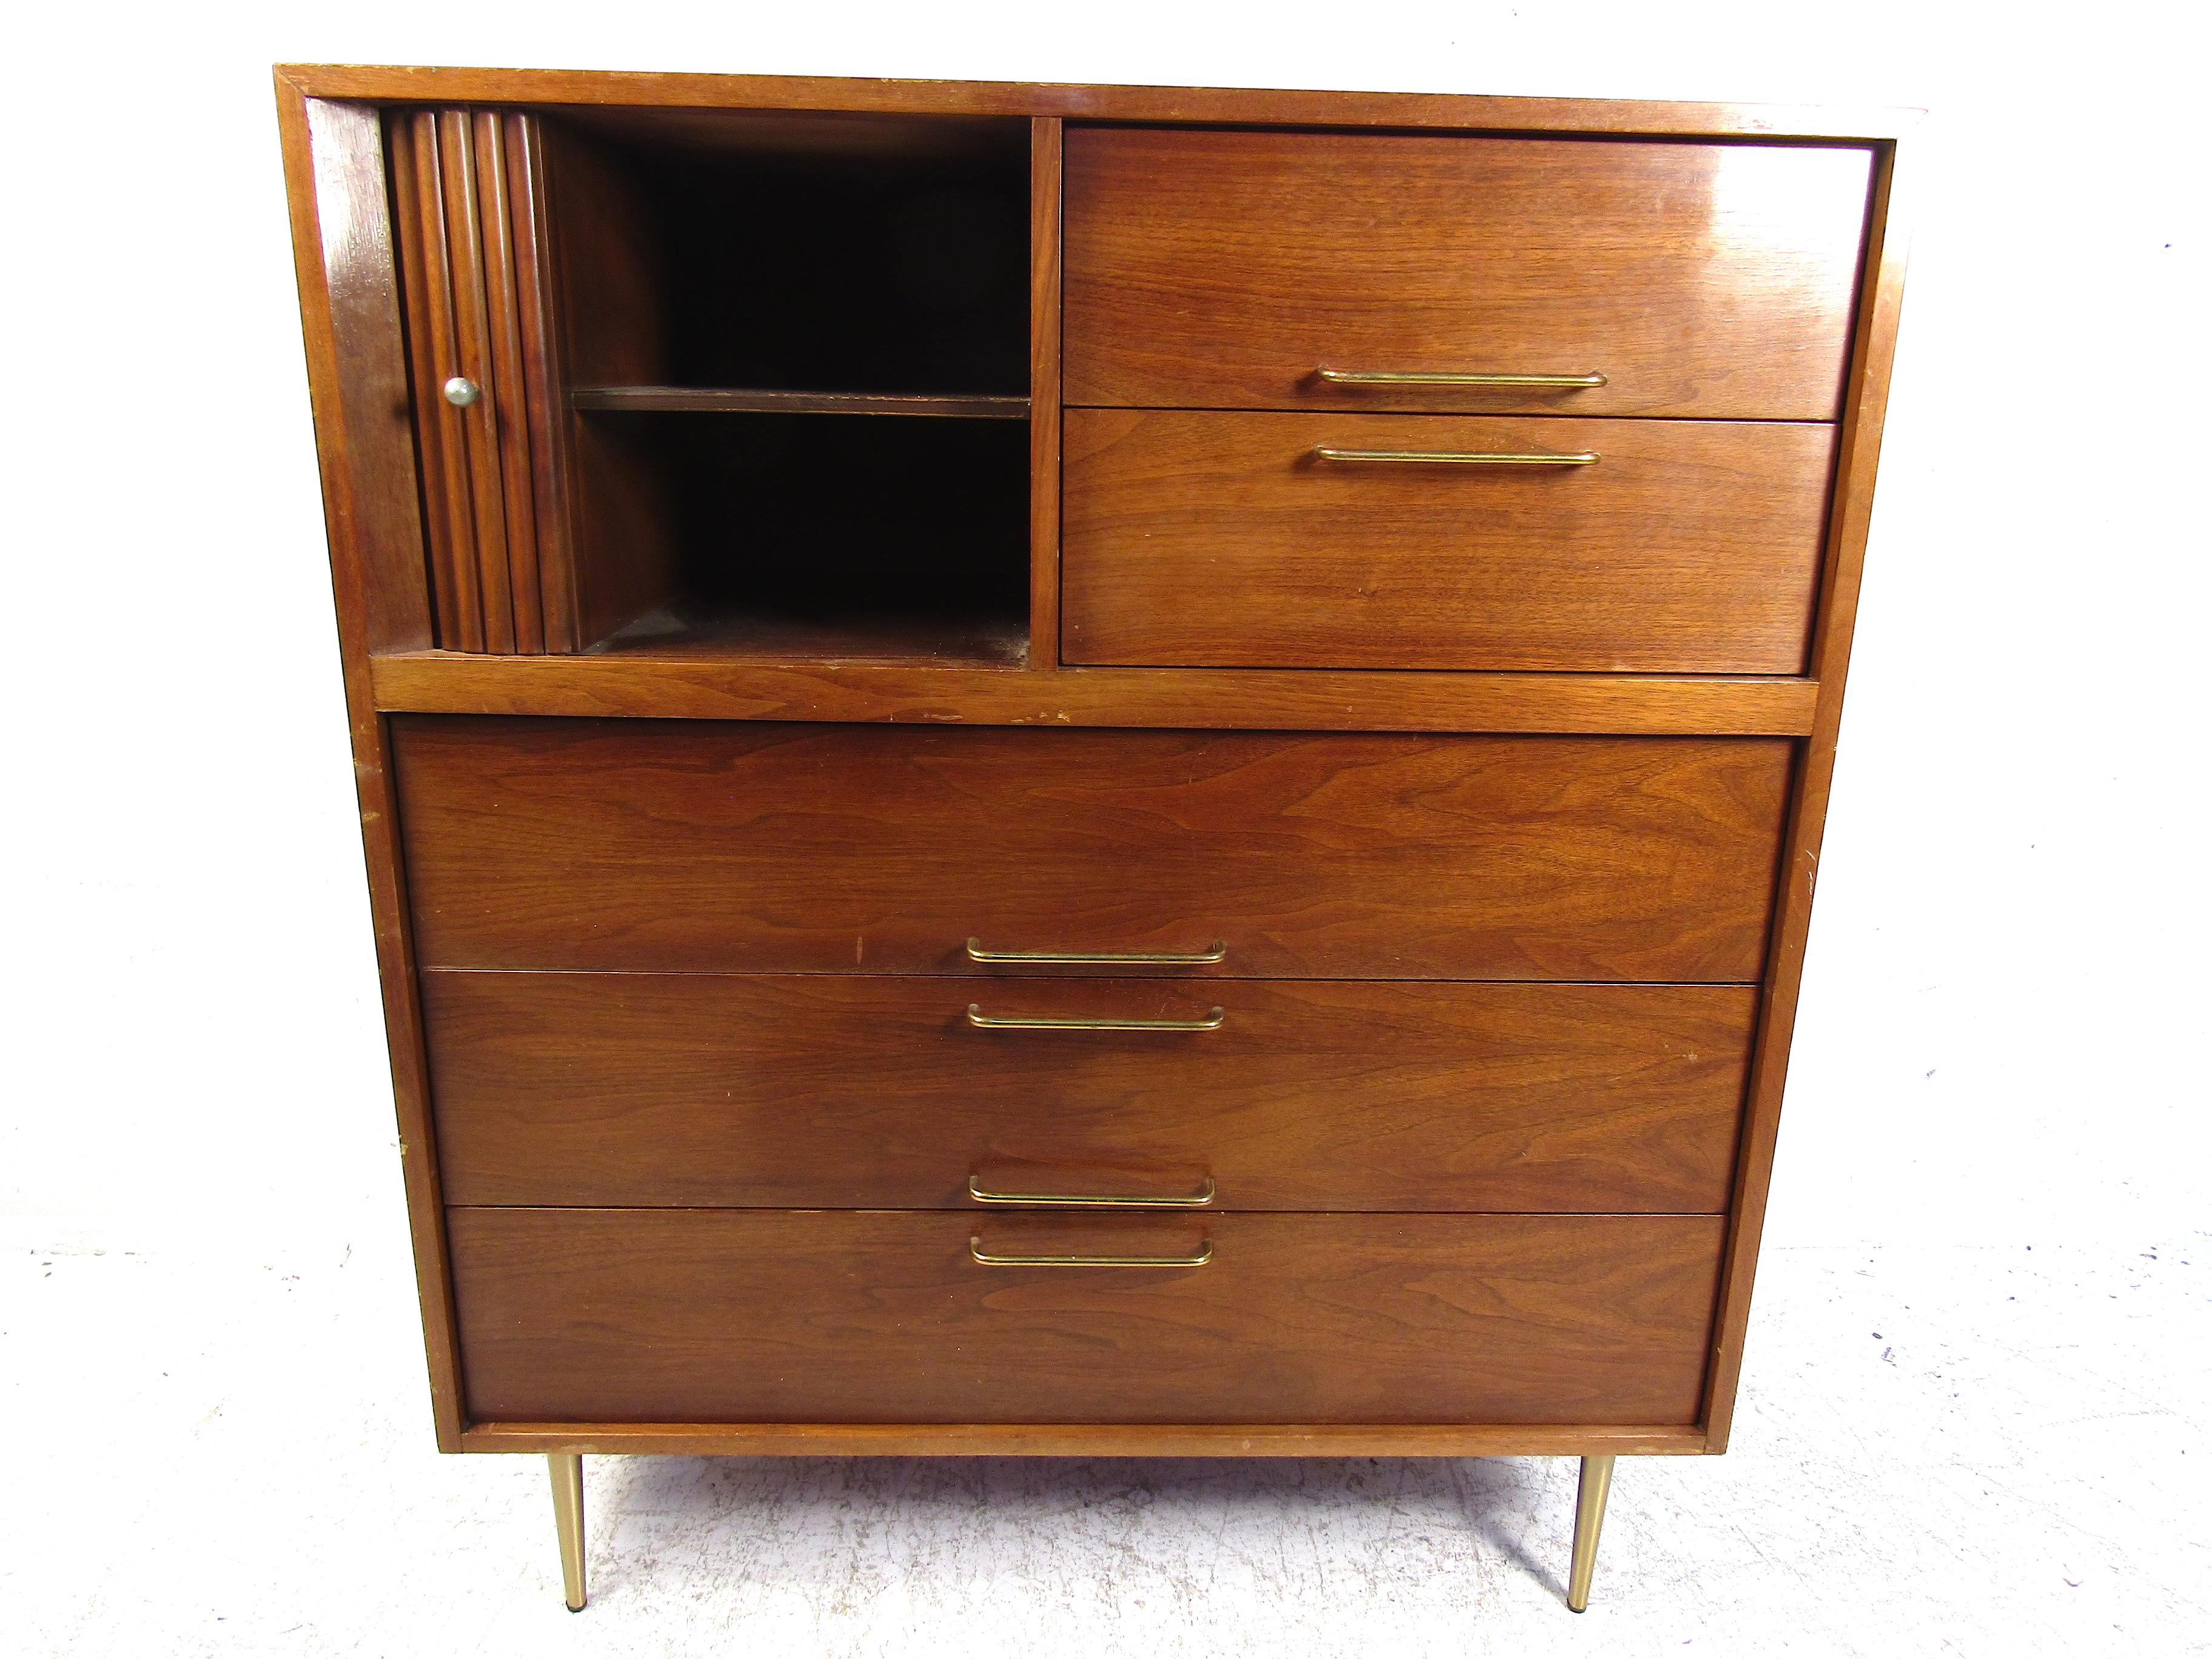 This beautiful midcentury dresser features a functional design and a bold aesthetic. It has sturdy brass covered legs that tie the whole look together. Perfect for any bedroom or guestroom. This piece features ample storage as well as a functional